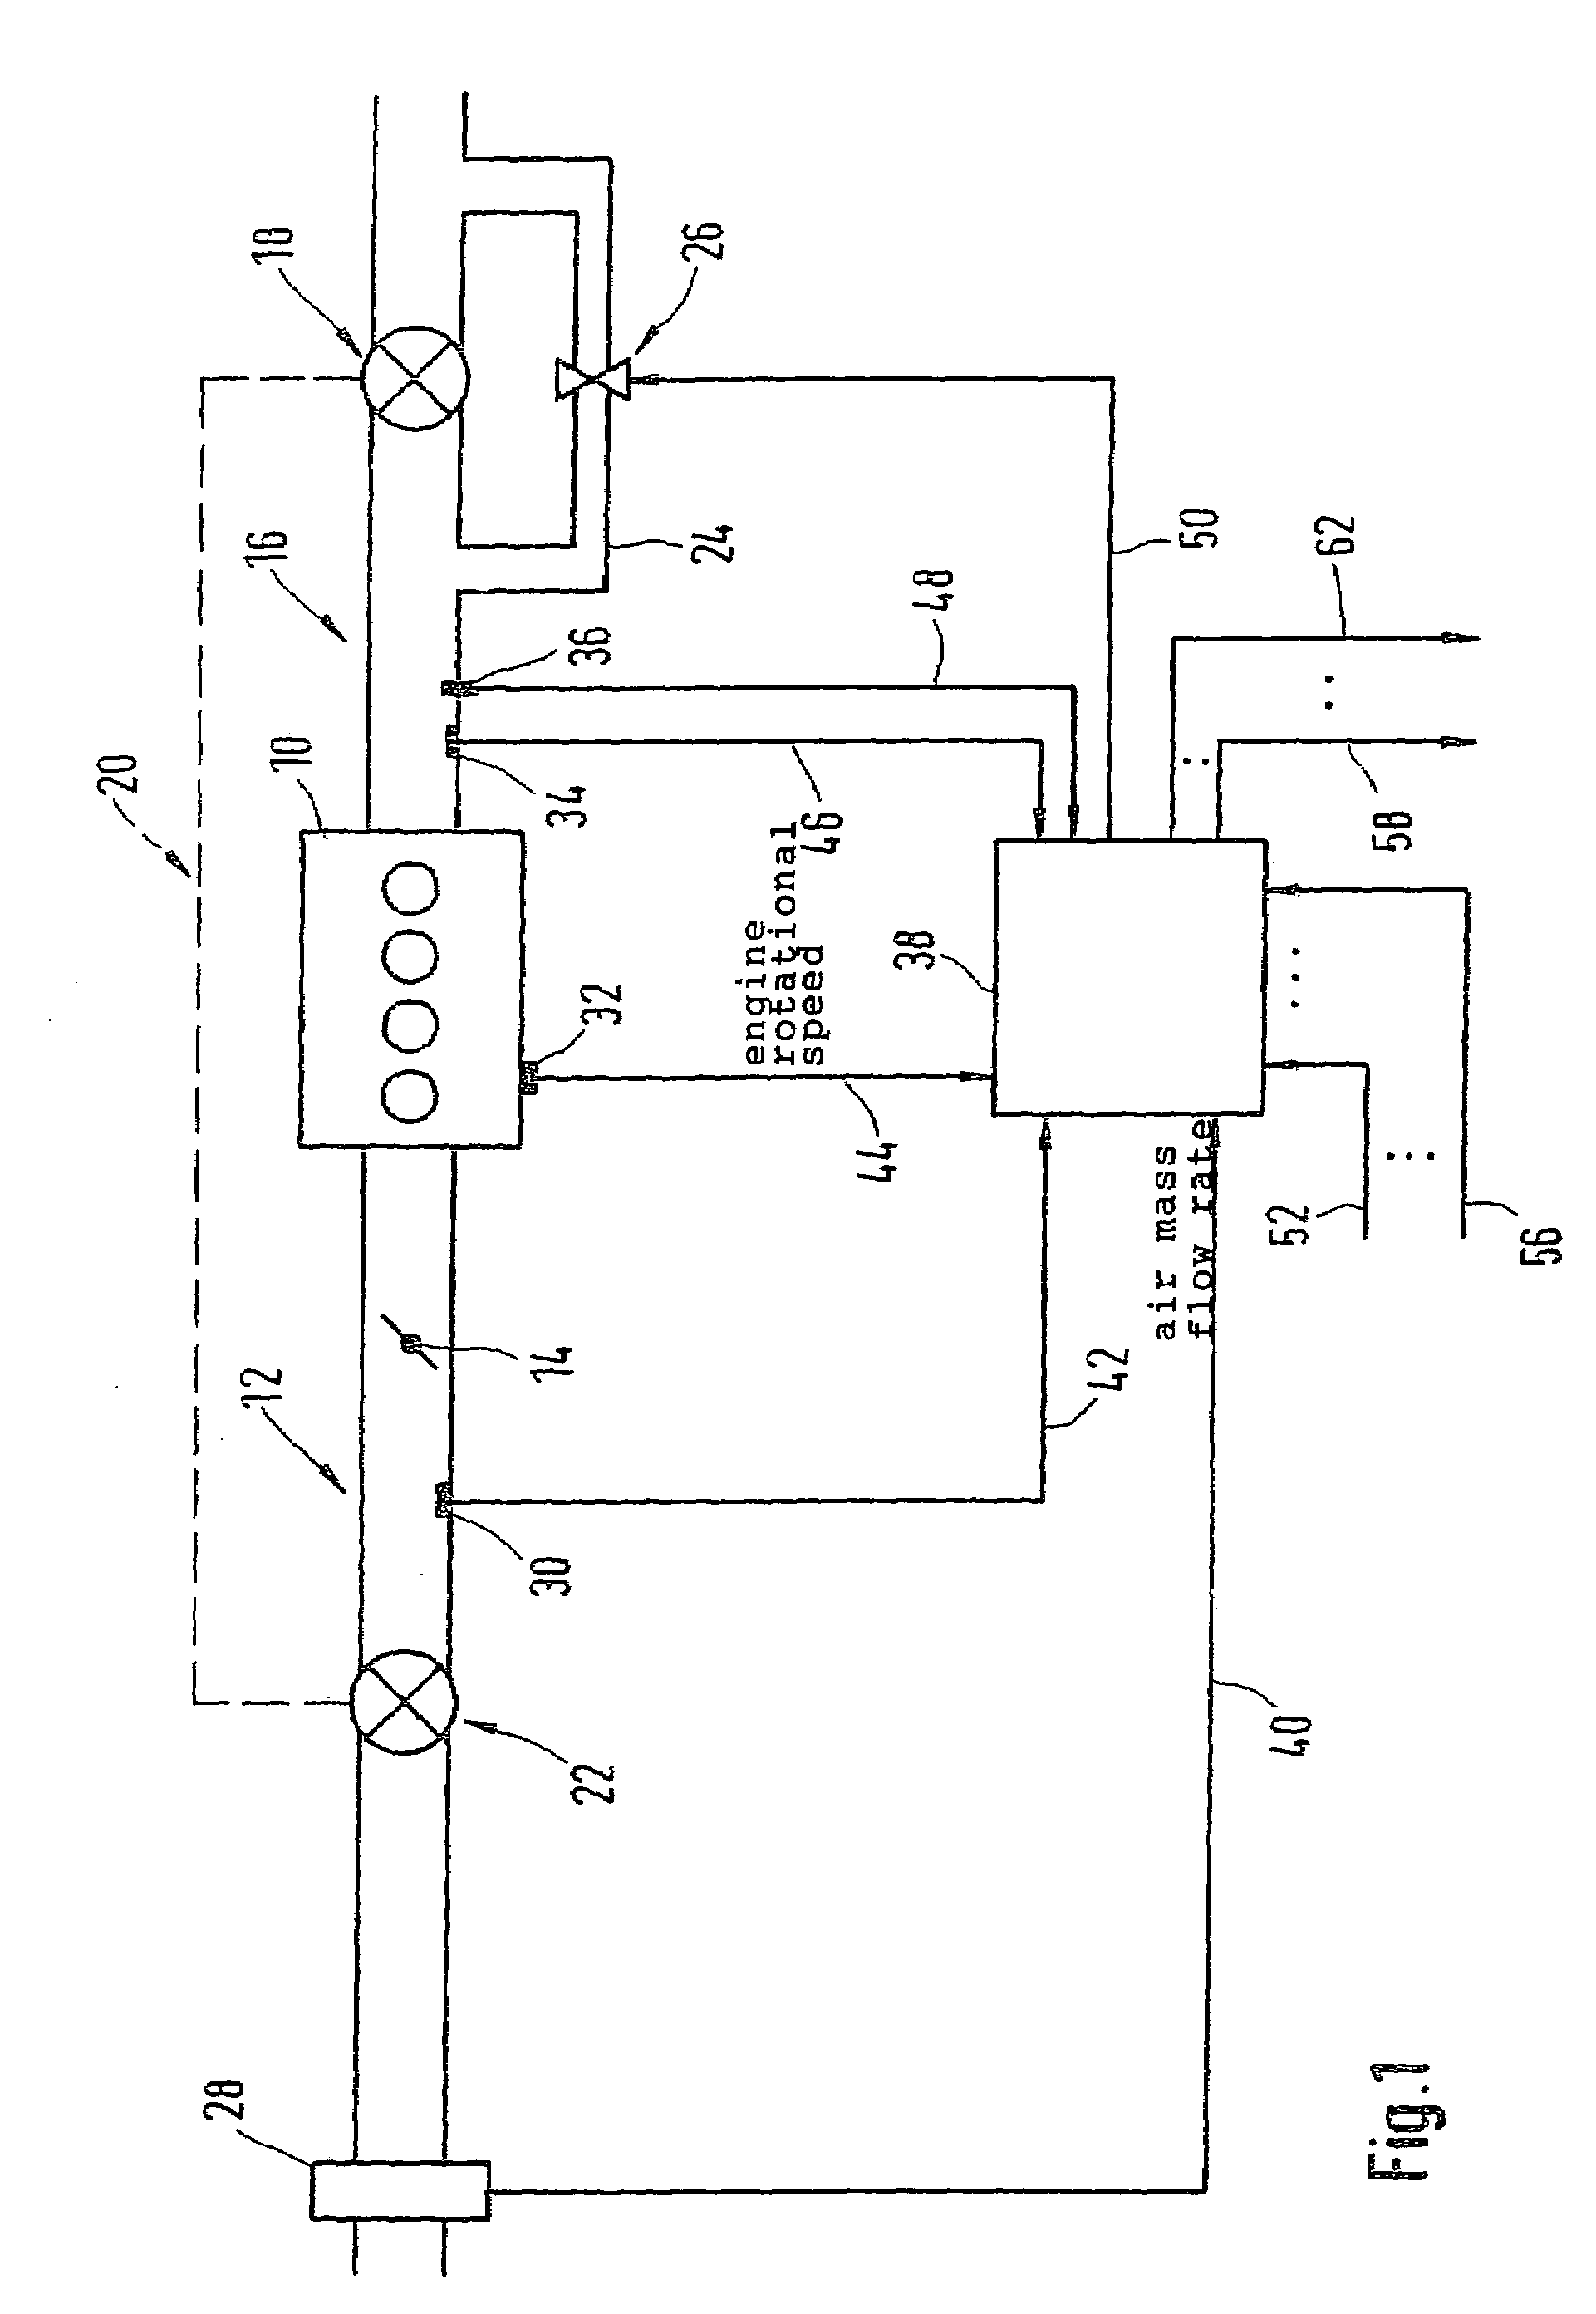 Method and device for operating at least one turbocharger on an internal combustion engine